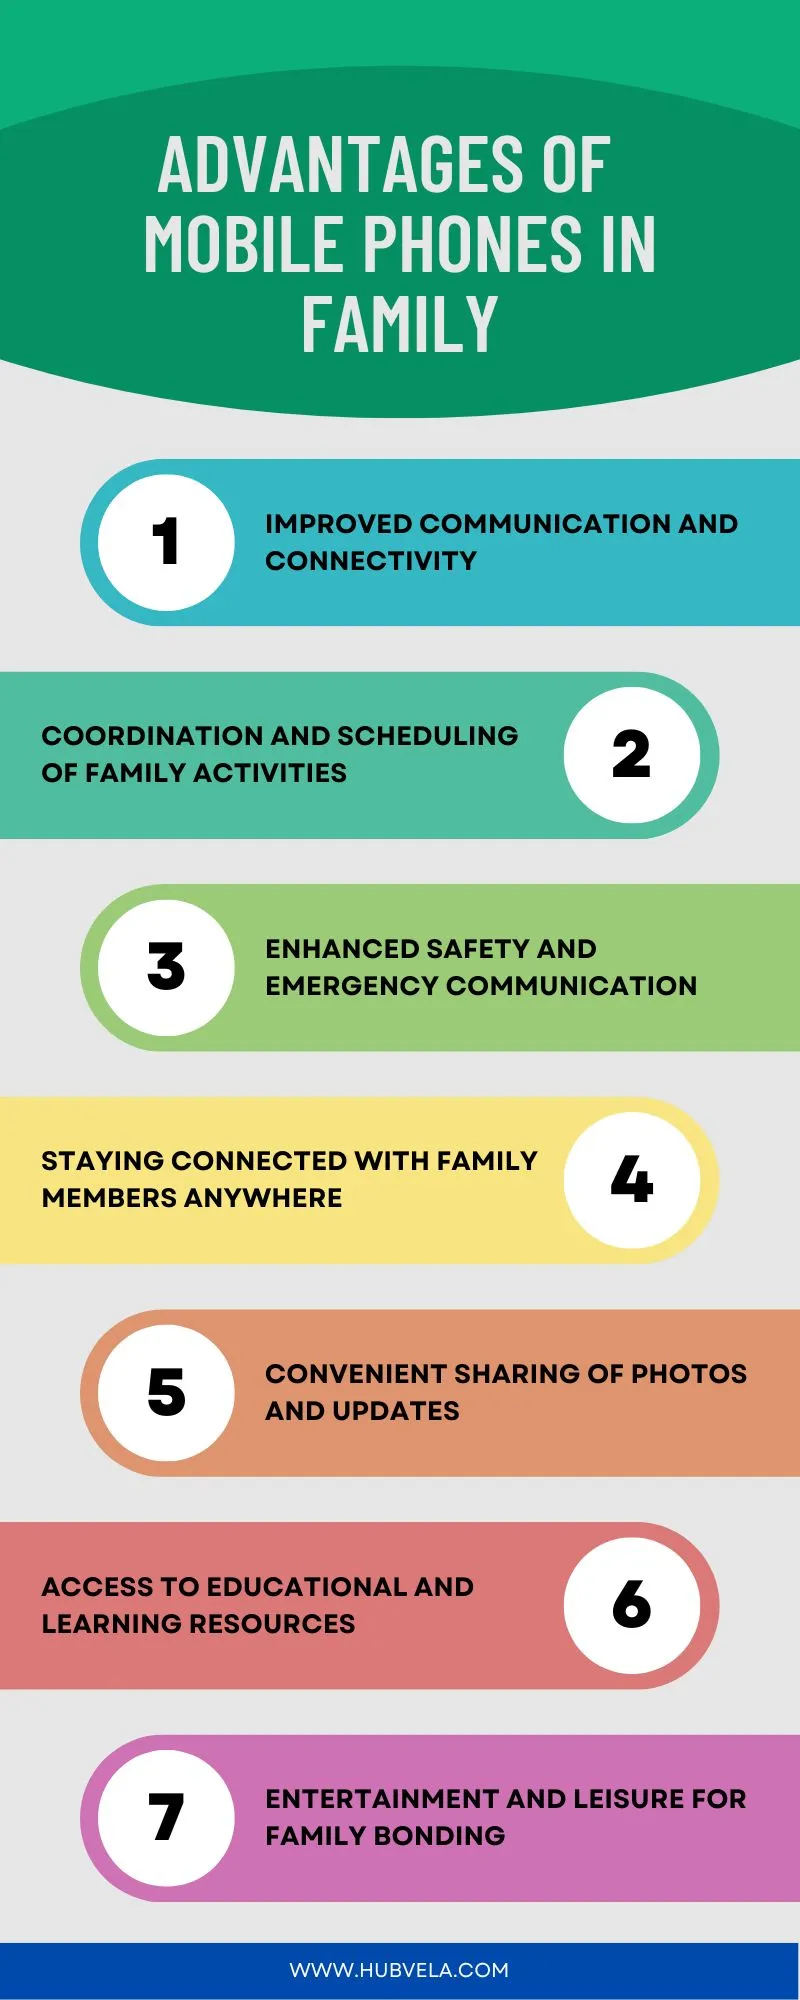 Advantages of Mobile Phones in Family Infographic